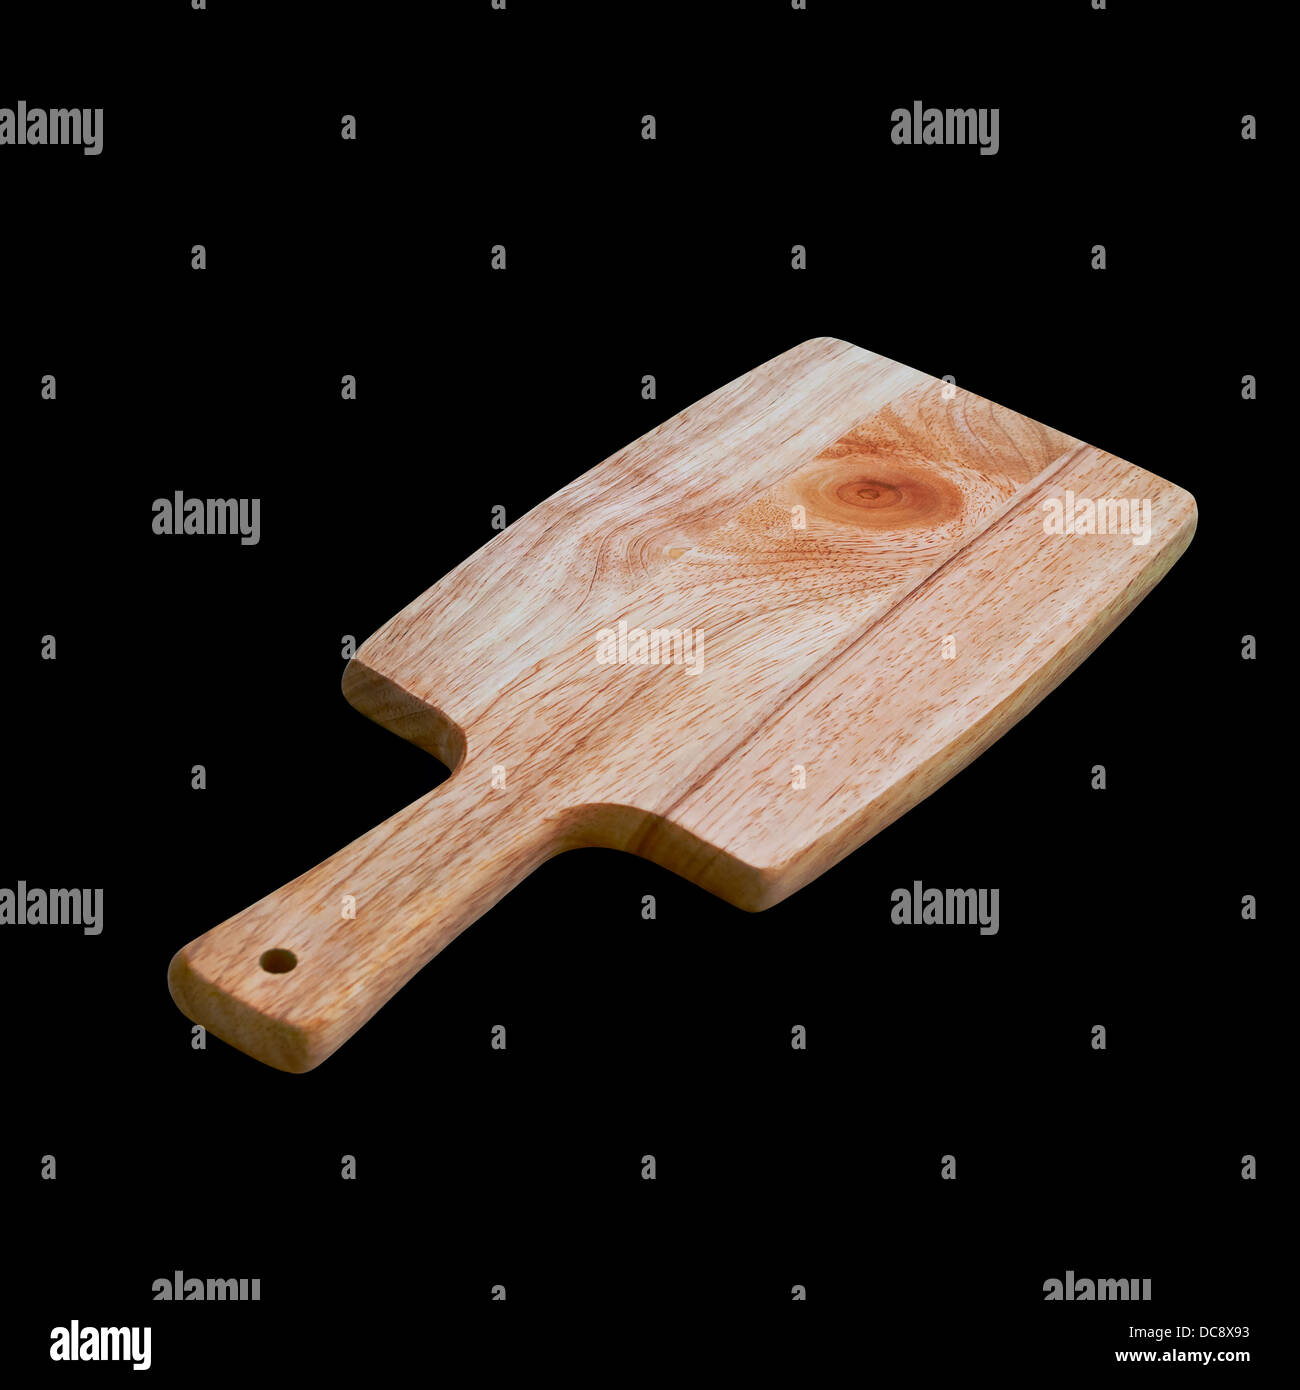 Wooden Chopping Board with Clipping path Included Stock Photo